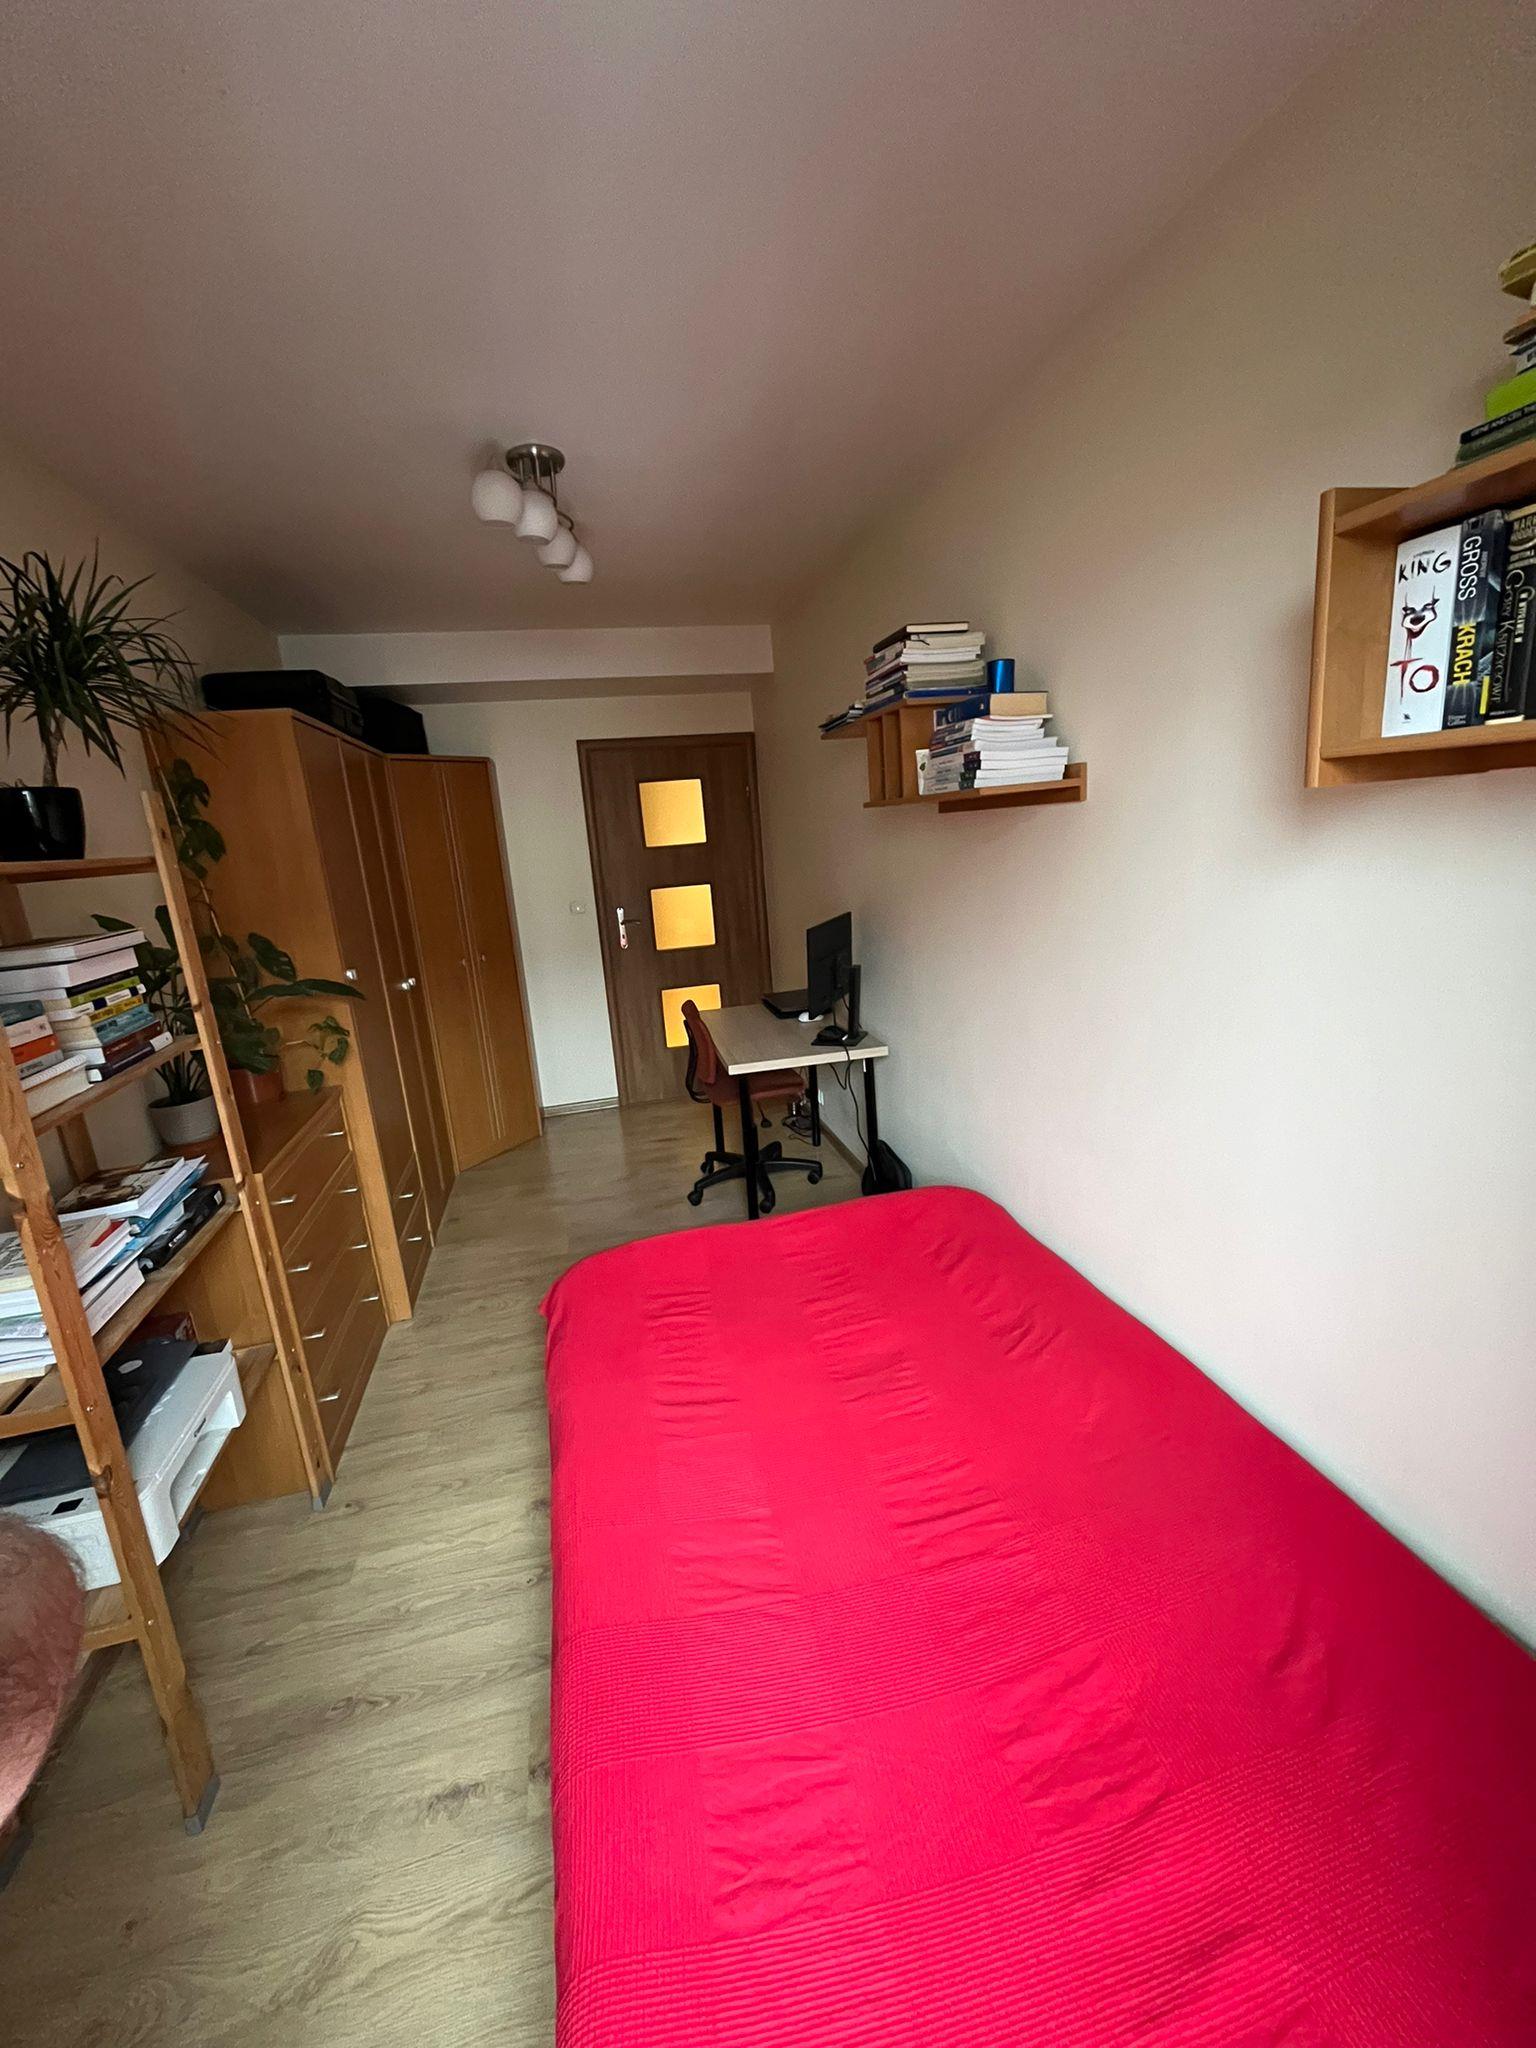 Wola duchacka, 2 rooms, parking